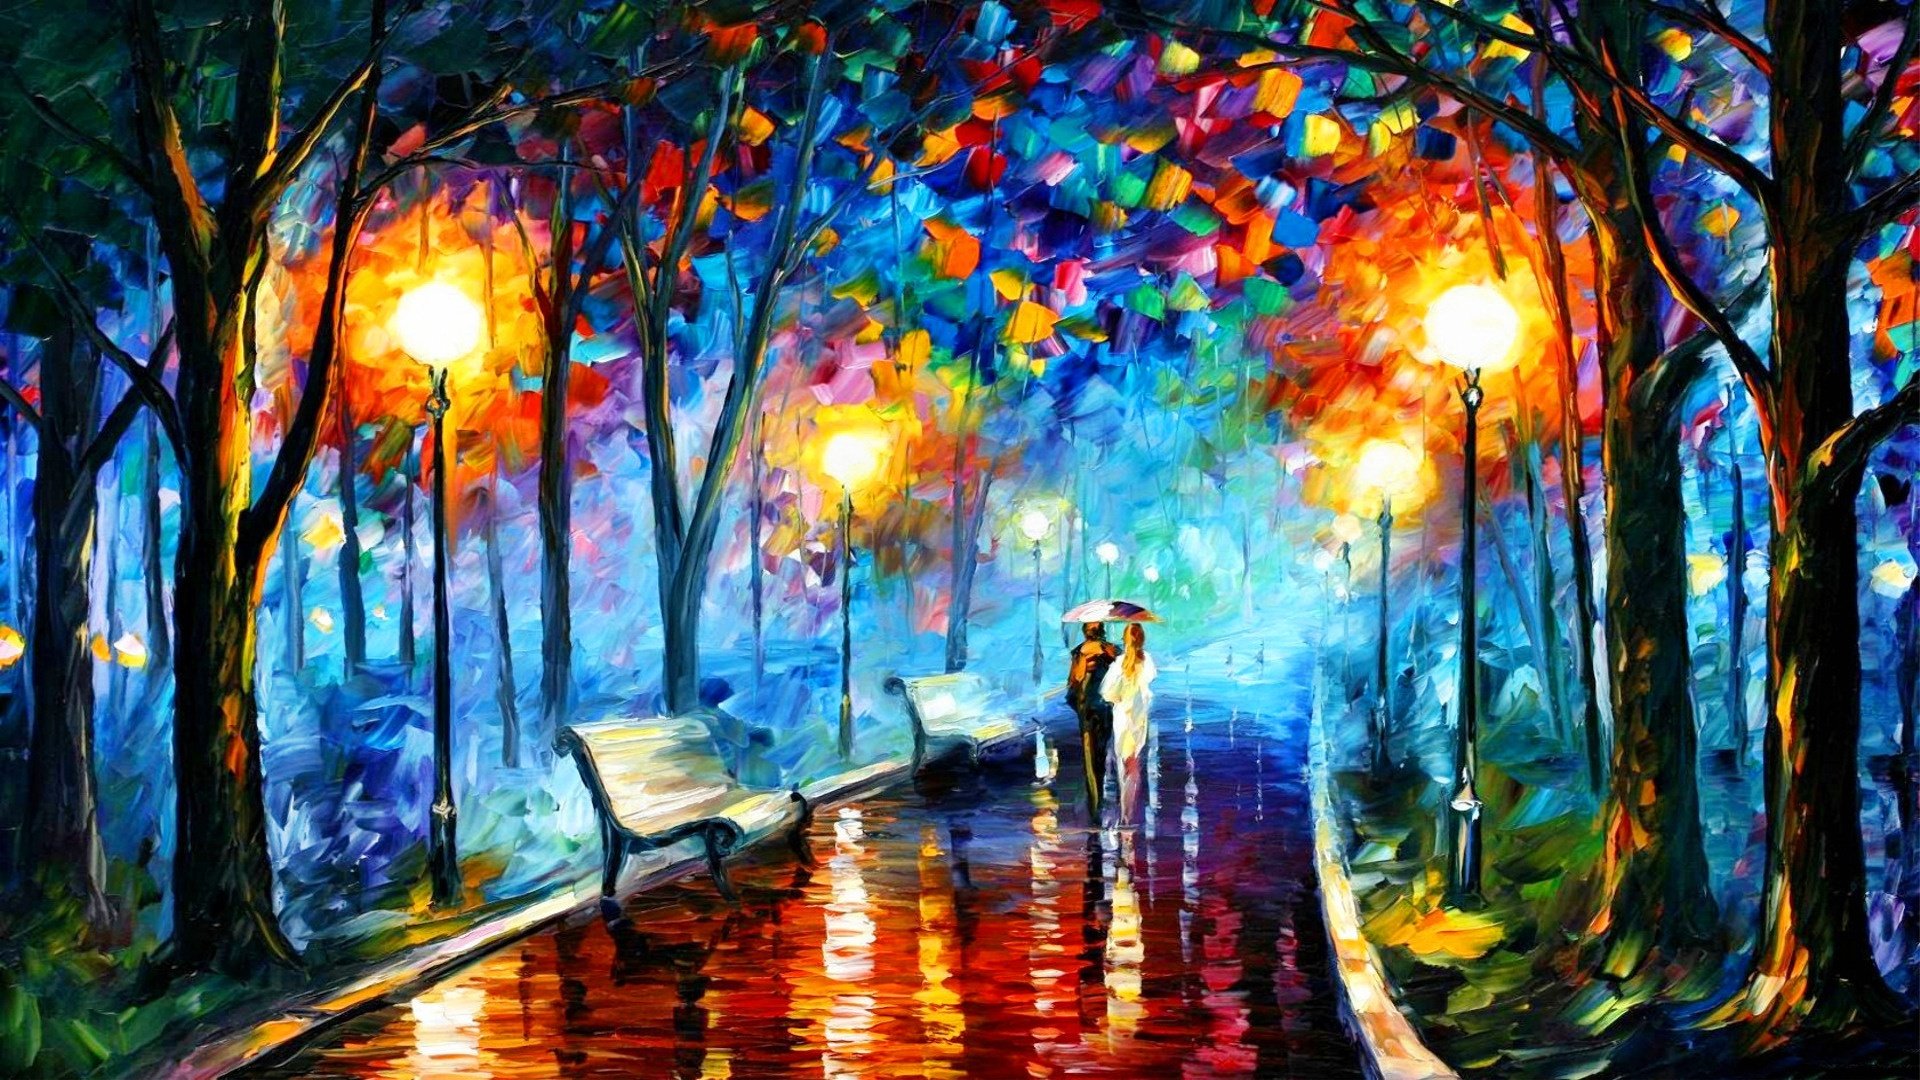 Wallpapers famous painting artist painter brush oil on canvas awesome 1920x1080